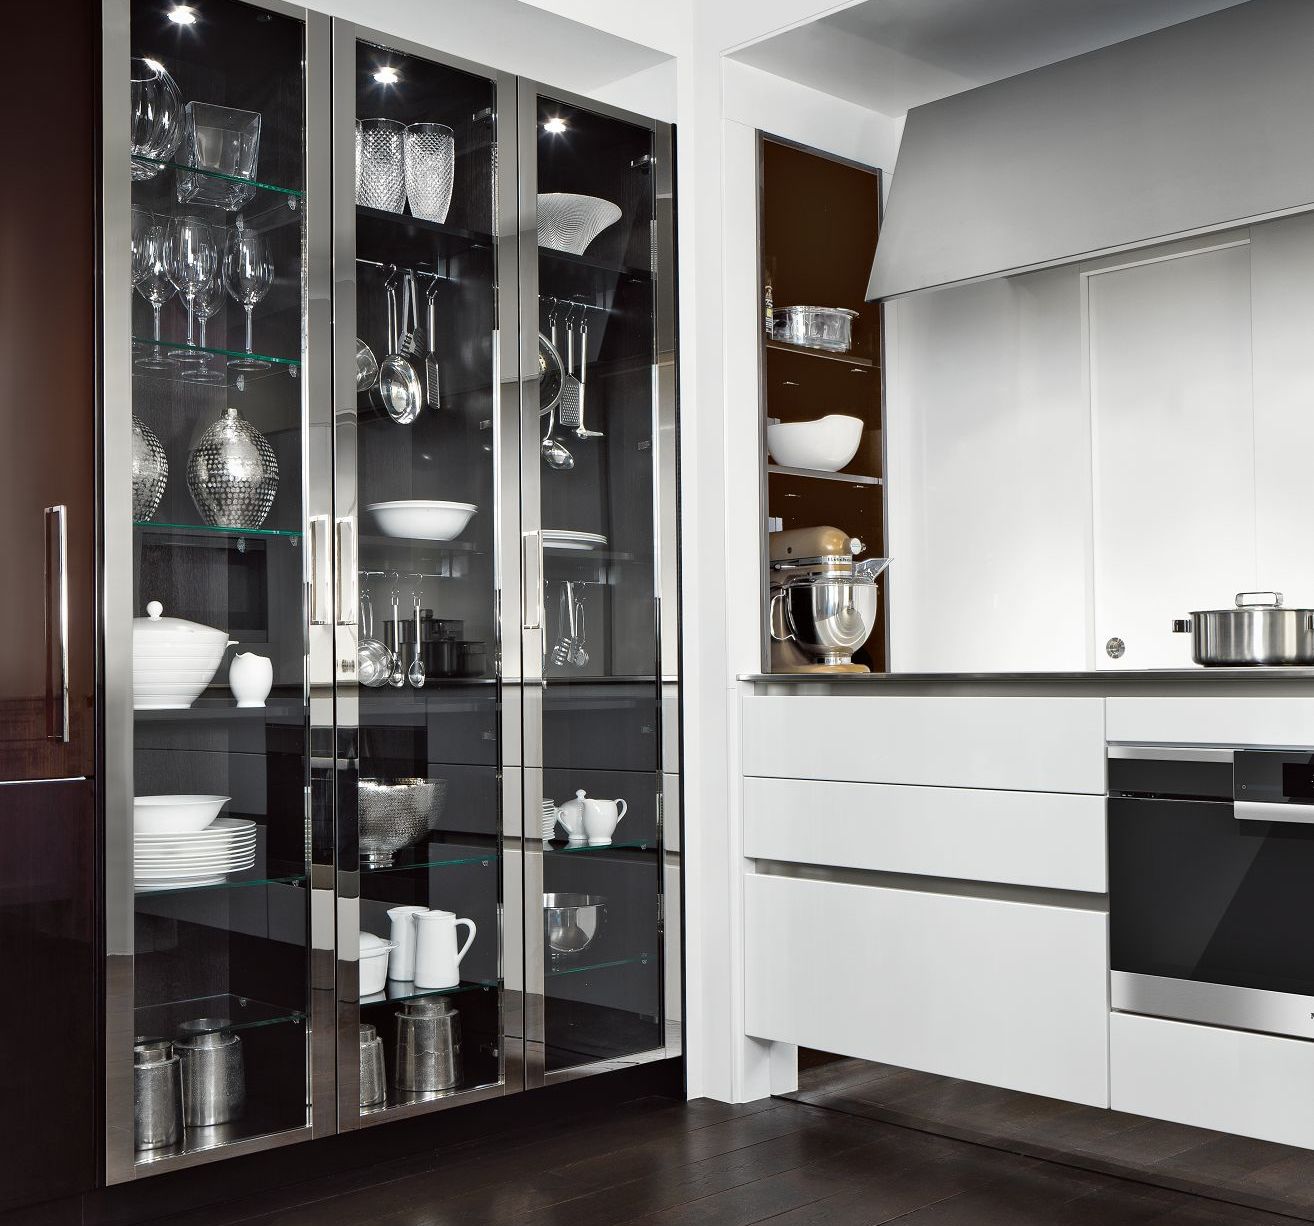 SieMatic BeauxArts: Every kitchen is unique | SieMatic